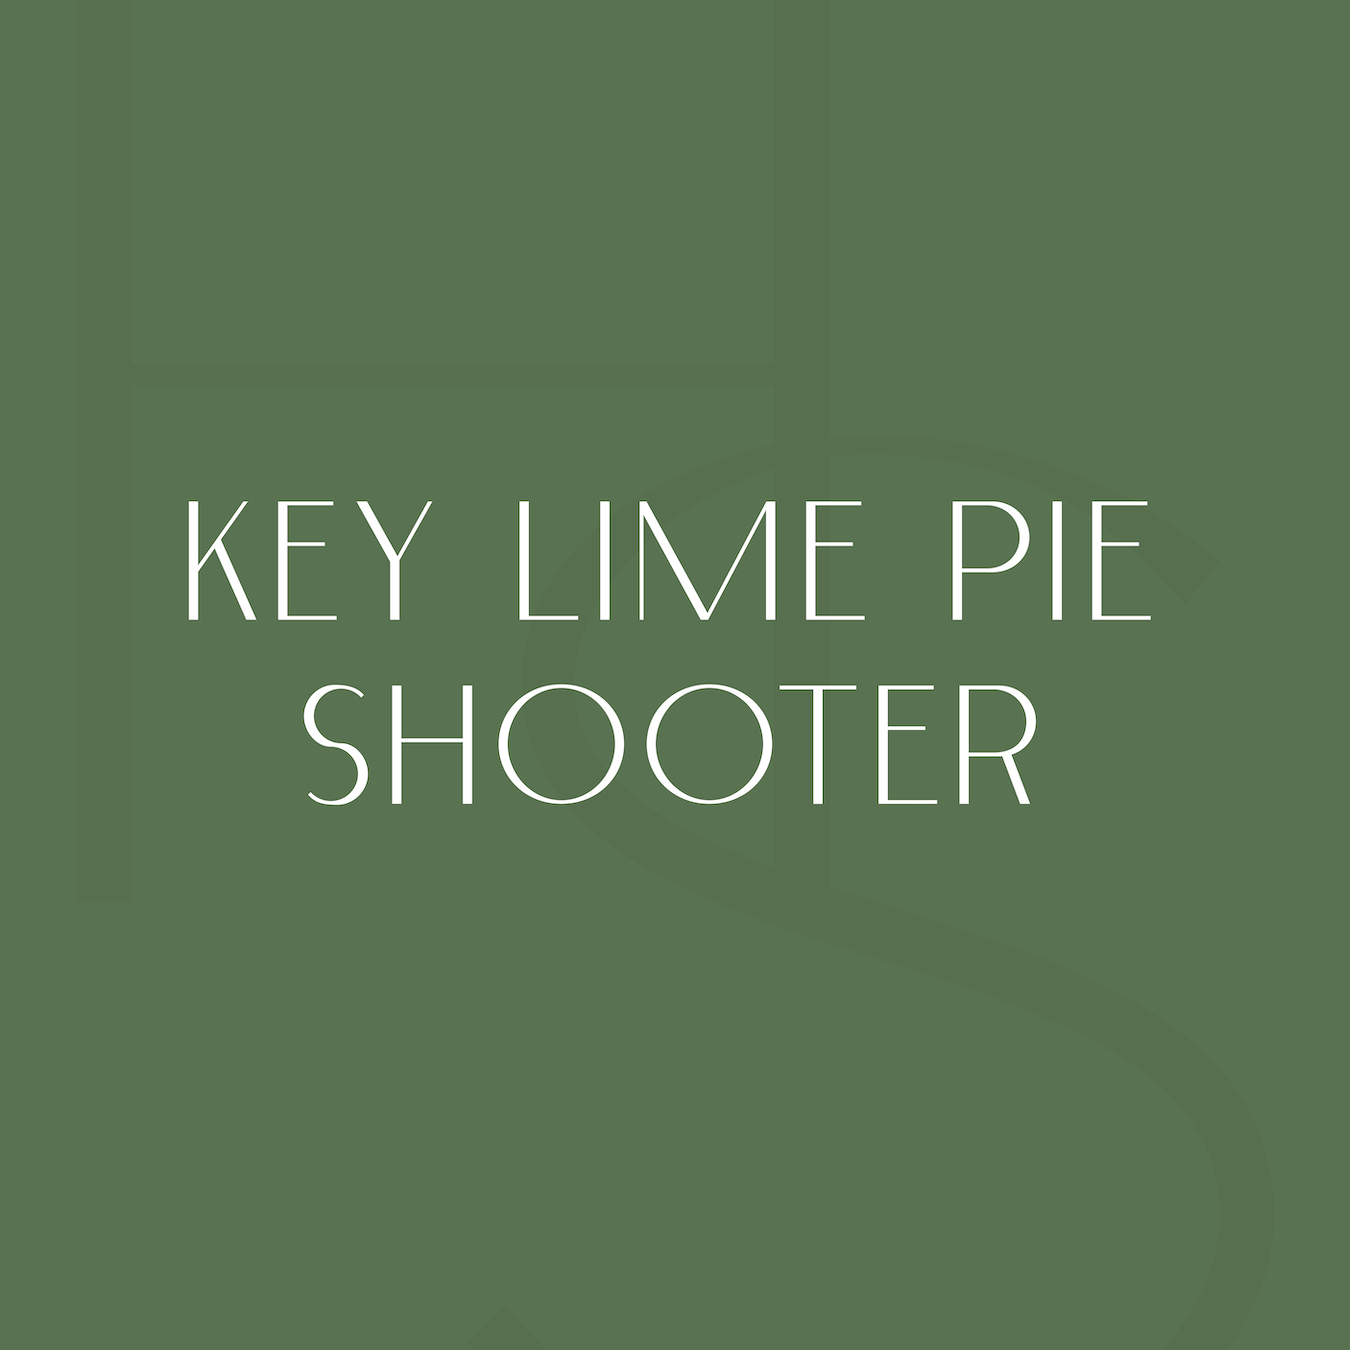 Key Lime Pie Shooter